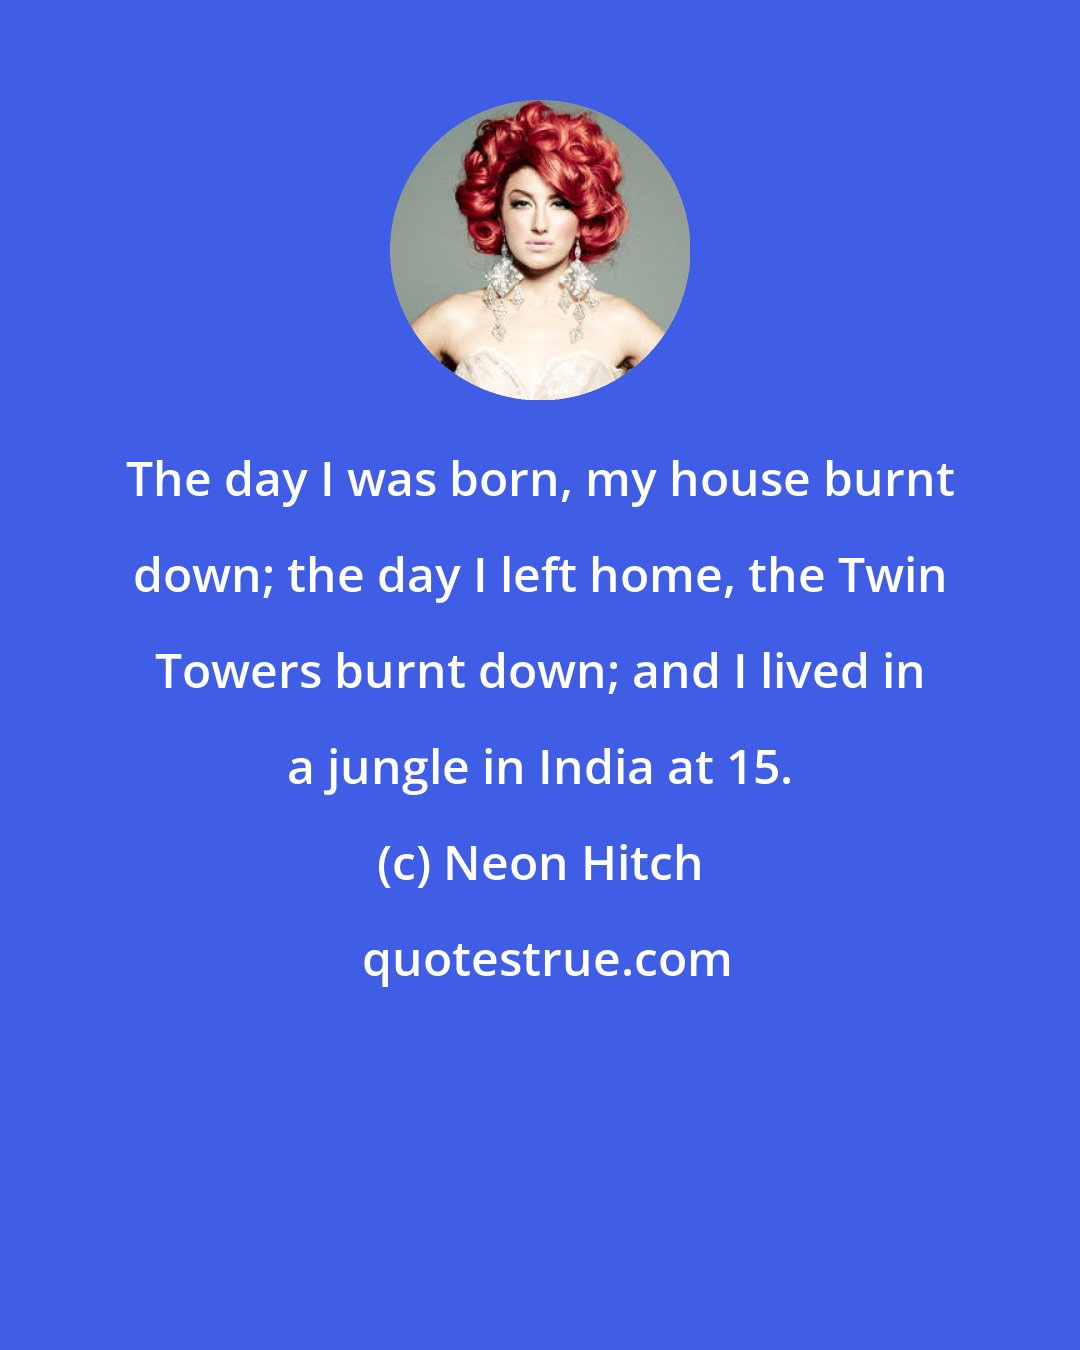 Neon Hitch: The day I was born, my house burnt down; the day I left home, the Twin Towers burnt down; and I lived in a jungle in India at 15.